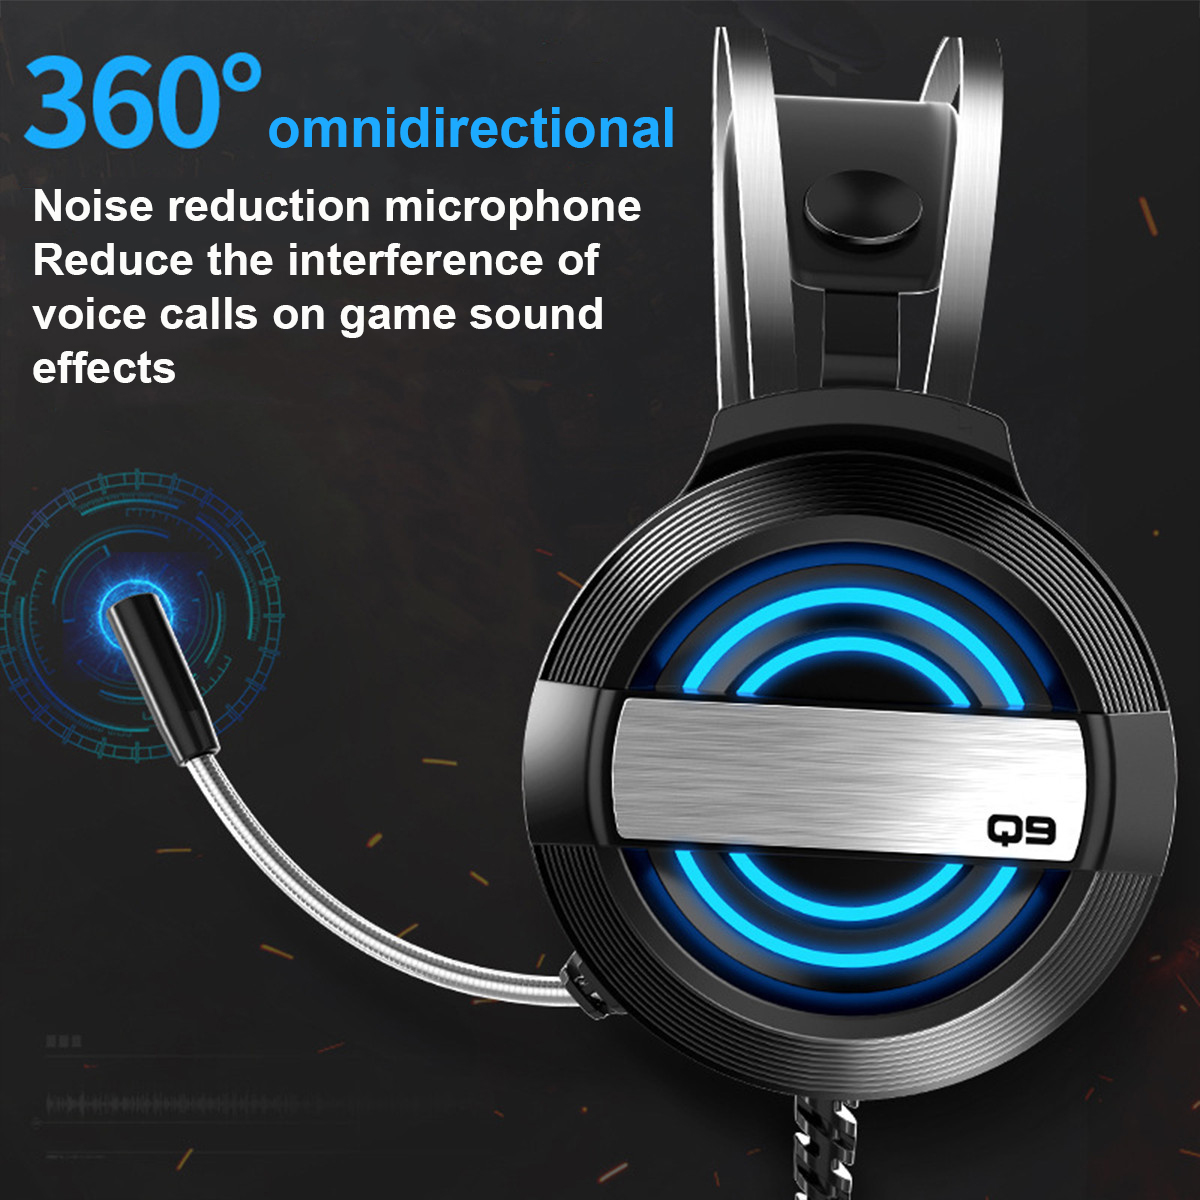 Bakeey-Gaming-Headphone-USB-Port-50mm-Driver-Headset-Foldable-Over-Ear-Gaming-Headset-Noise-Cancelli-1747835-3